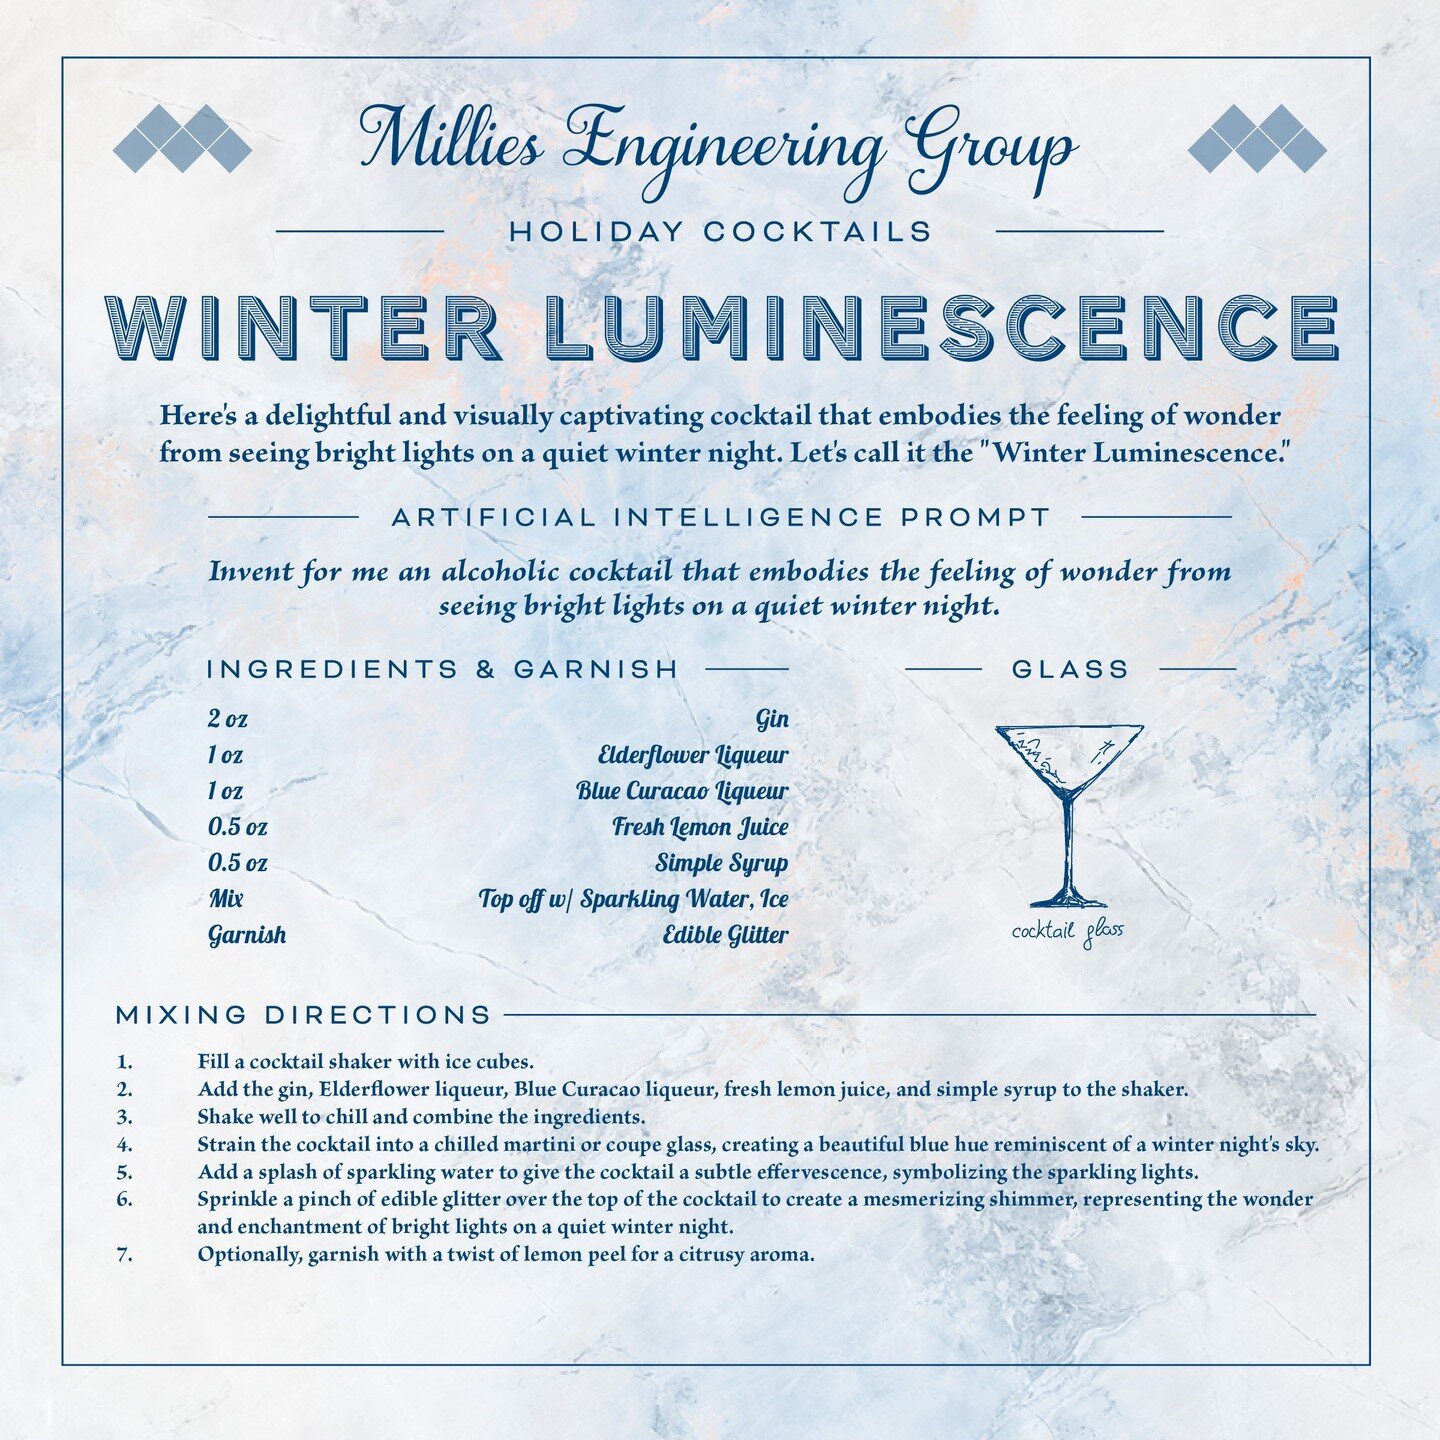 Our next signature holiday cocktail is sure to captivate! Artificial Intelligence was asked to invent a cocktail that embodies the feeling of wonder from seeing bright lights on a quiet winter night✨✨✨ 
Check out the link in bio for our staff's react